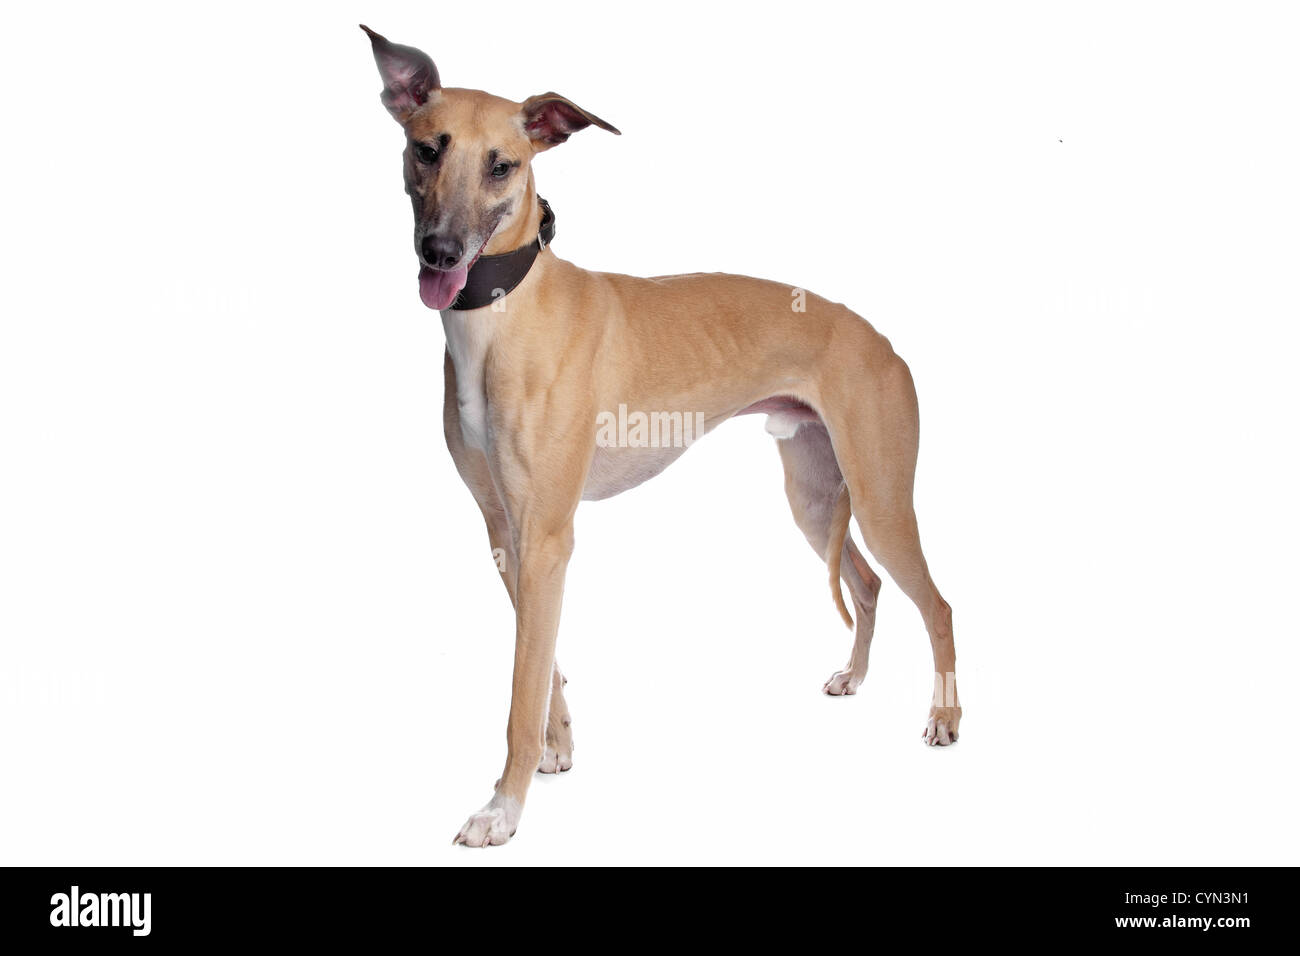 Greyhound, Whippet, Galgo dog in front of a white background Stock Photo